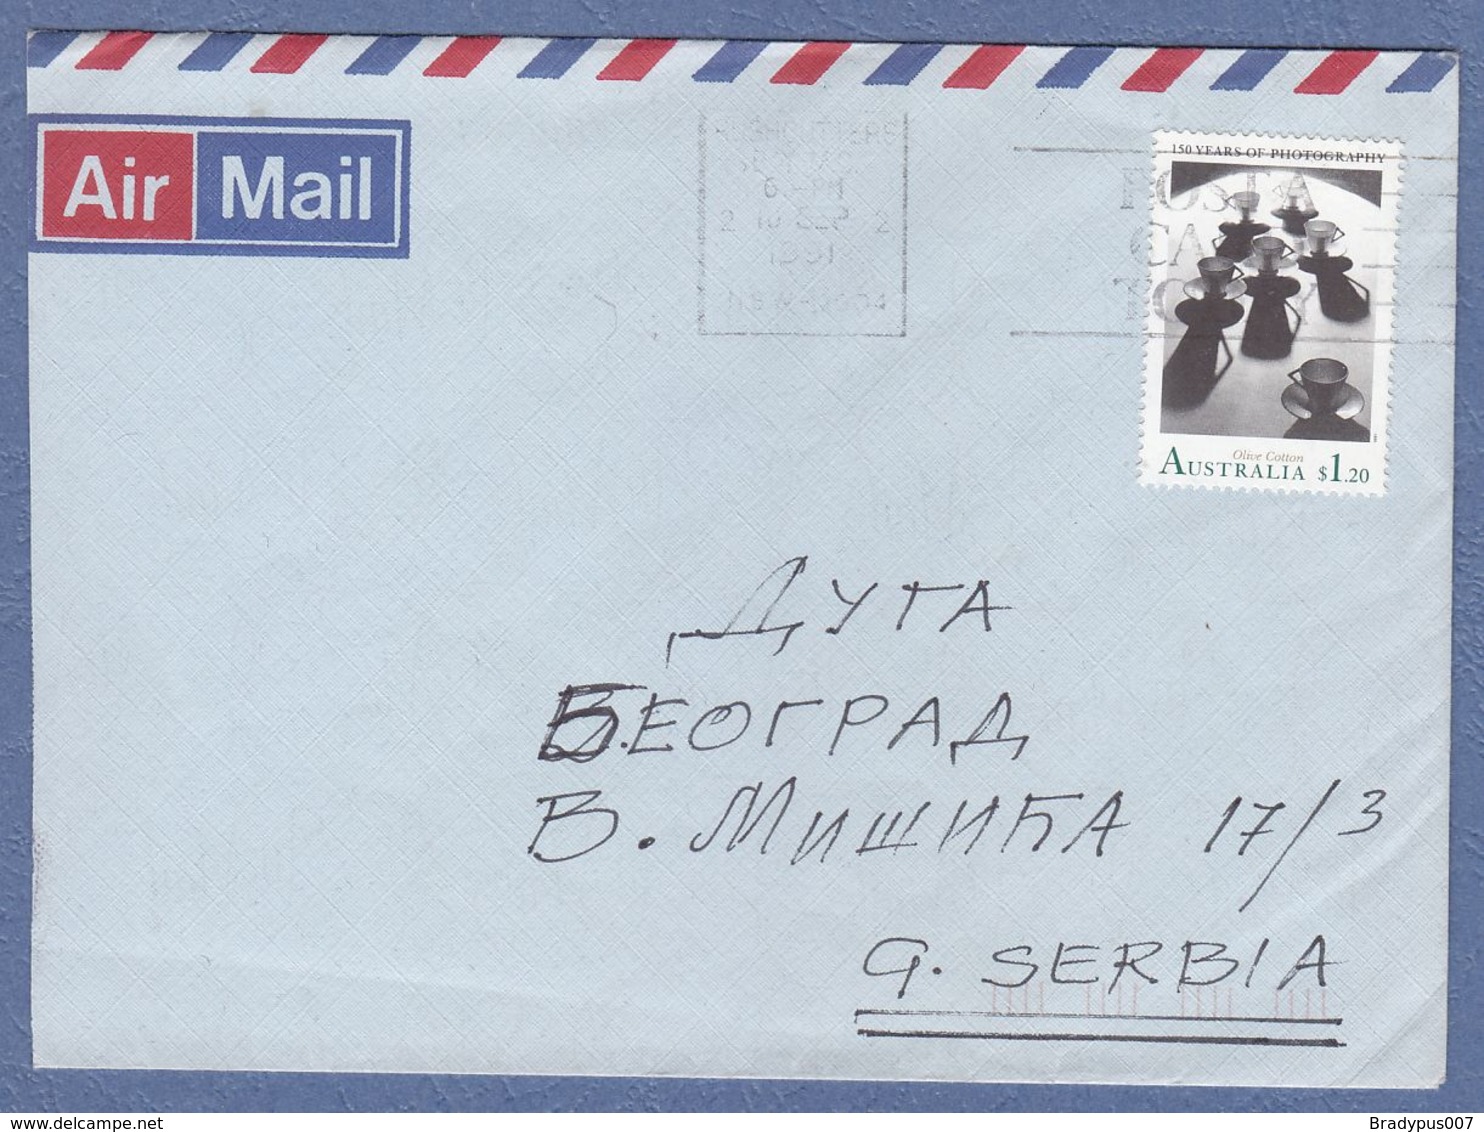 1991 Australia $ 1.20-150 Years Of Photography To Serbia-Airmail Cover - Covers & Documents